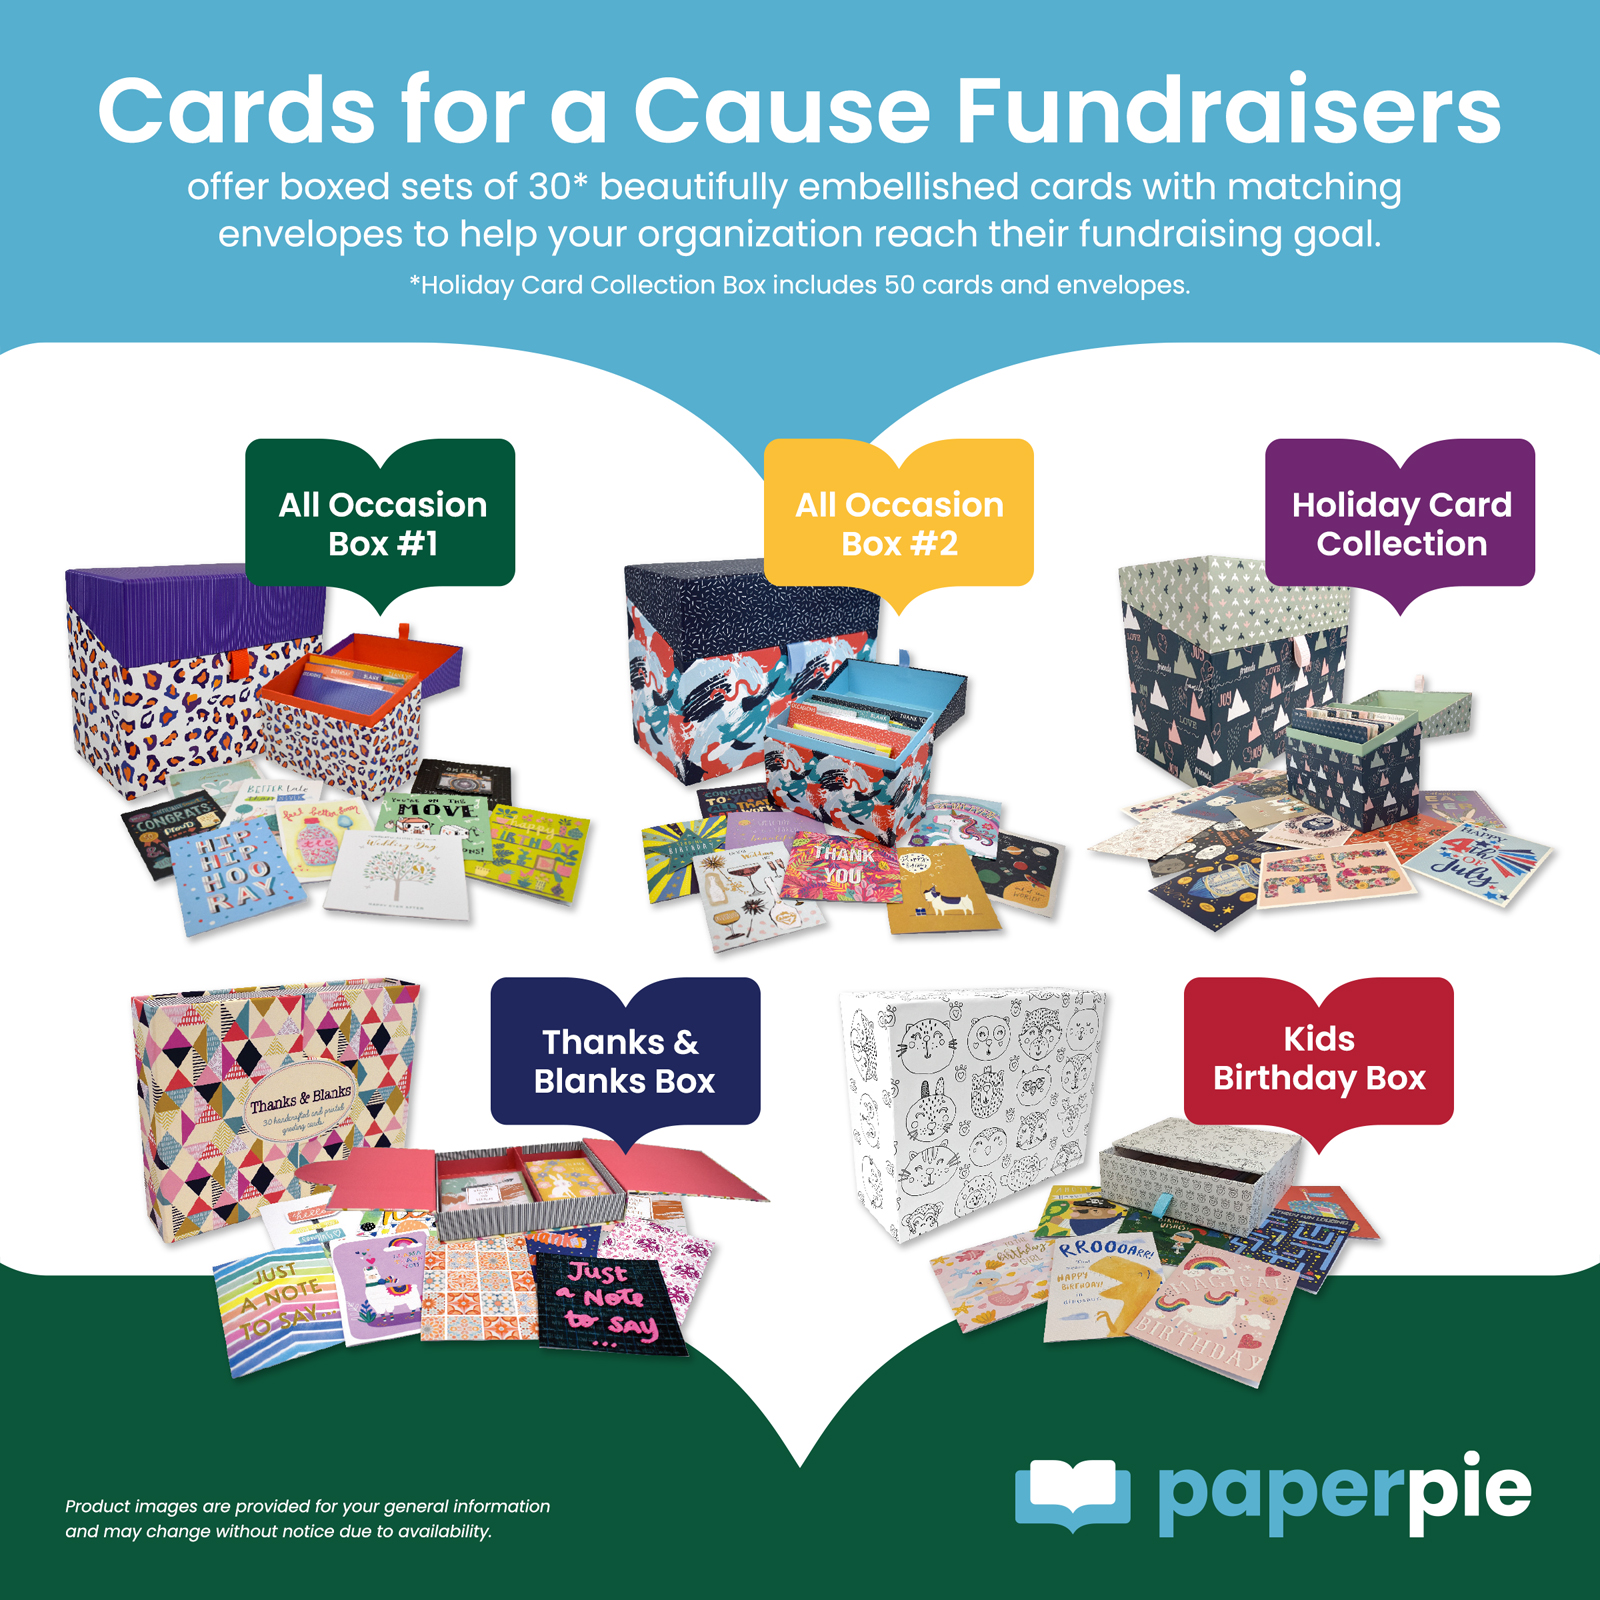 PaperPie Cards for a Cause